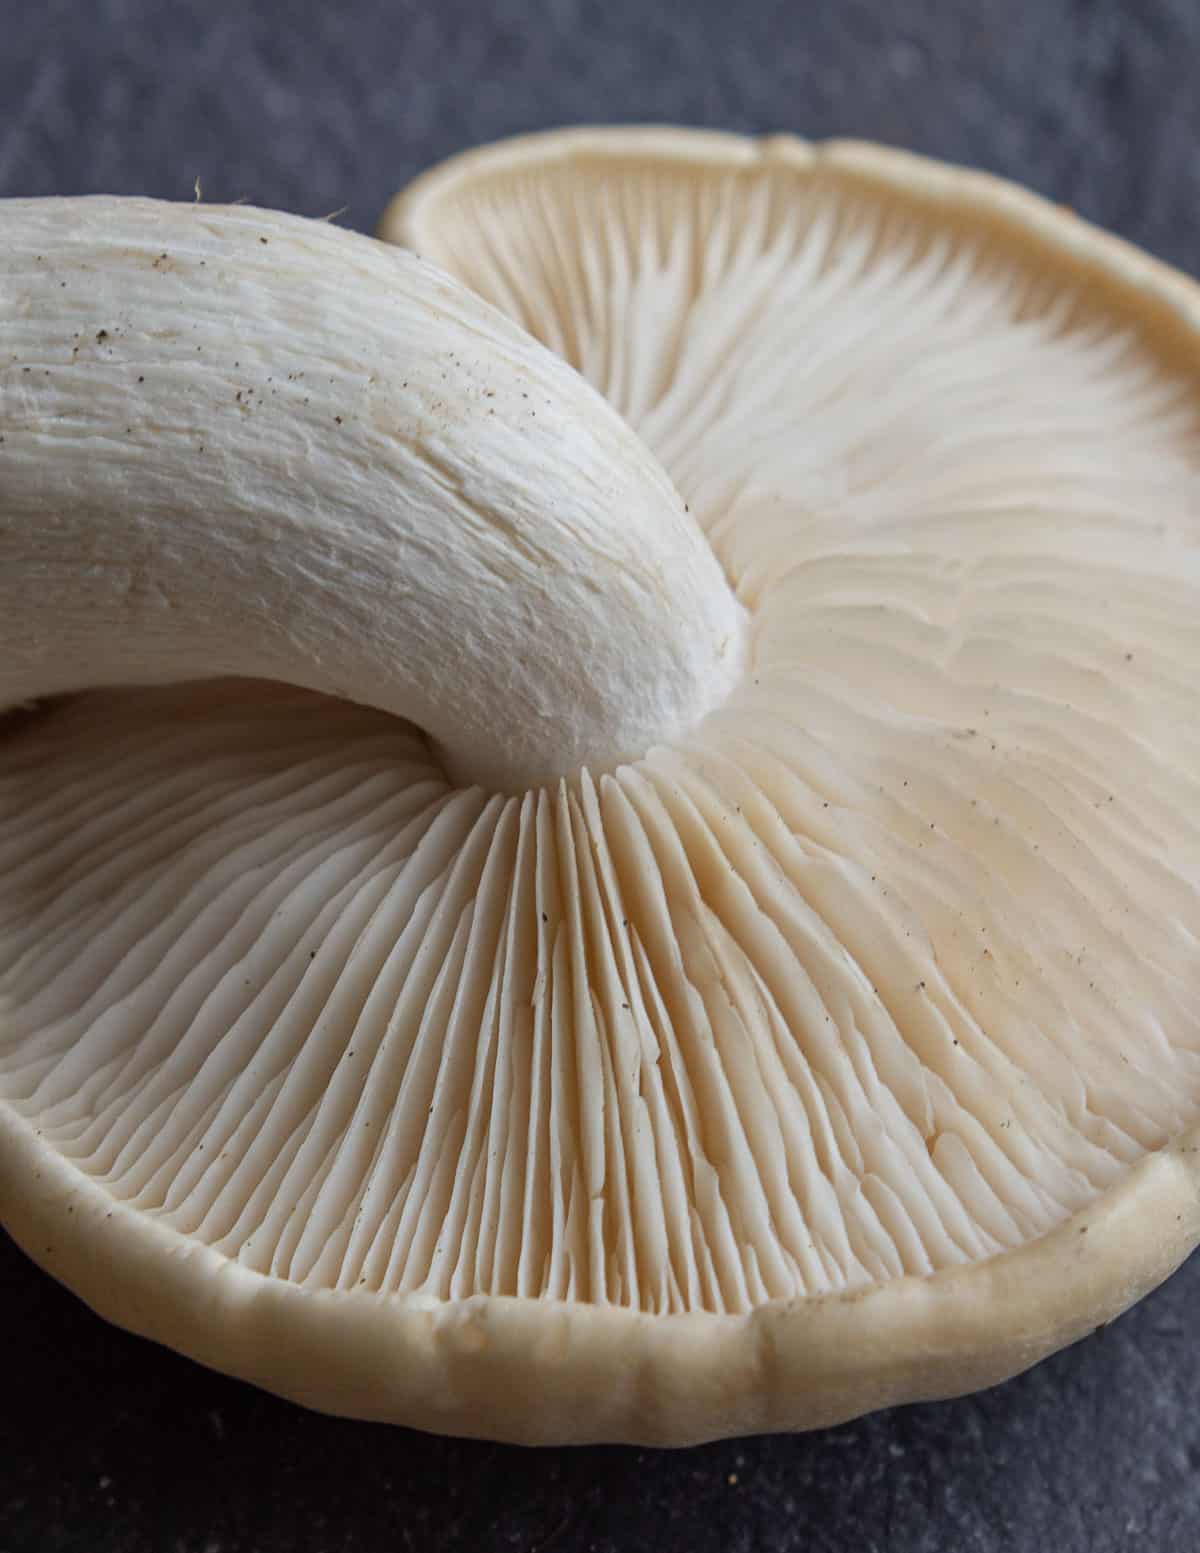 Close up image of wild elm oyster mushroom showing curved stem and gills. 